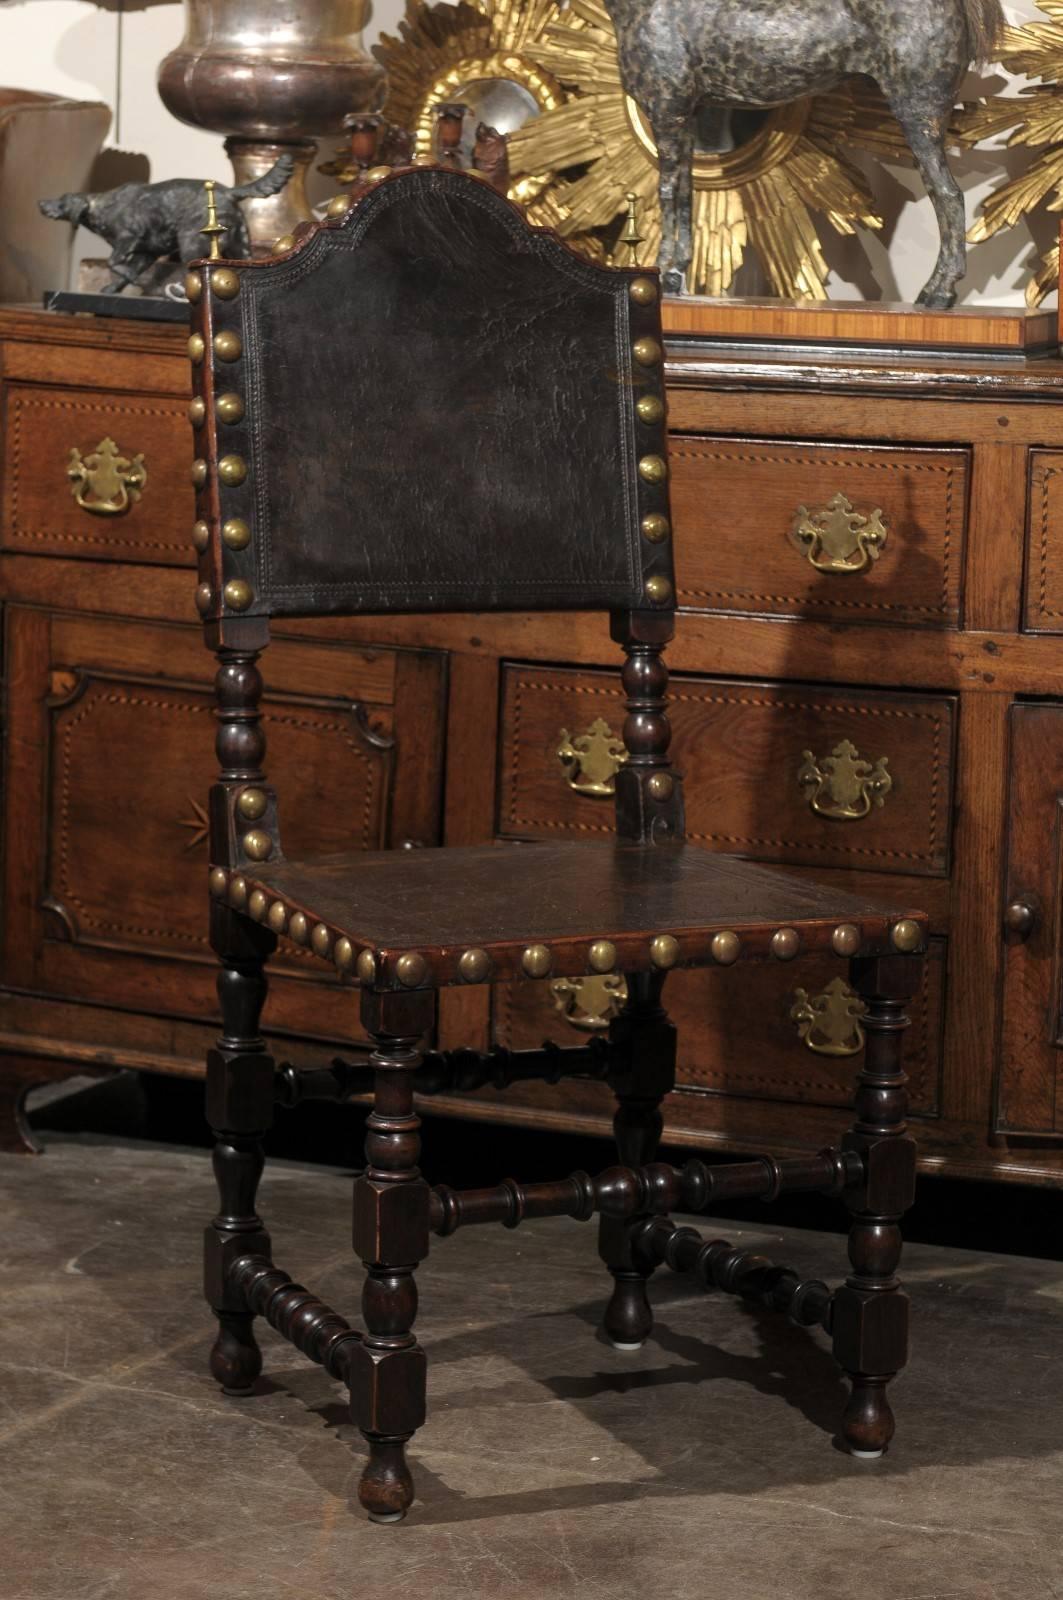 Early 20th century English leather side chair. This English chair from circa 1920 features a leather upholstery with exquisite brass nailheads around the back and seat. The slightly slanted back has a bonnet type crest rail flanked with two brass